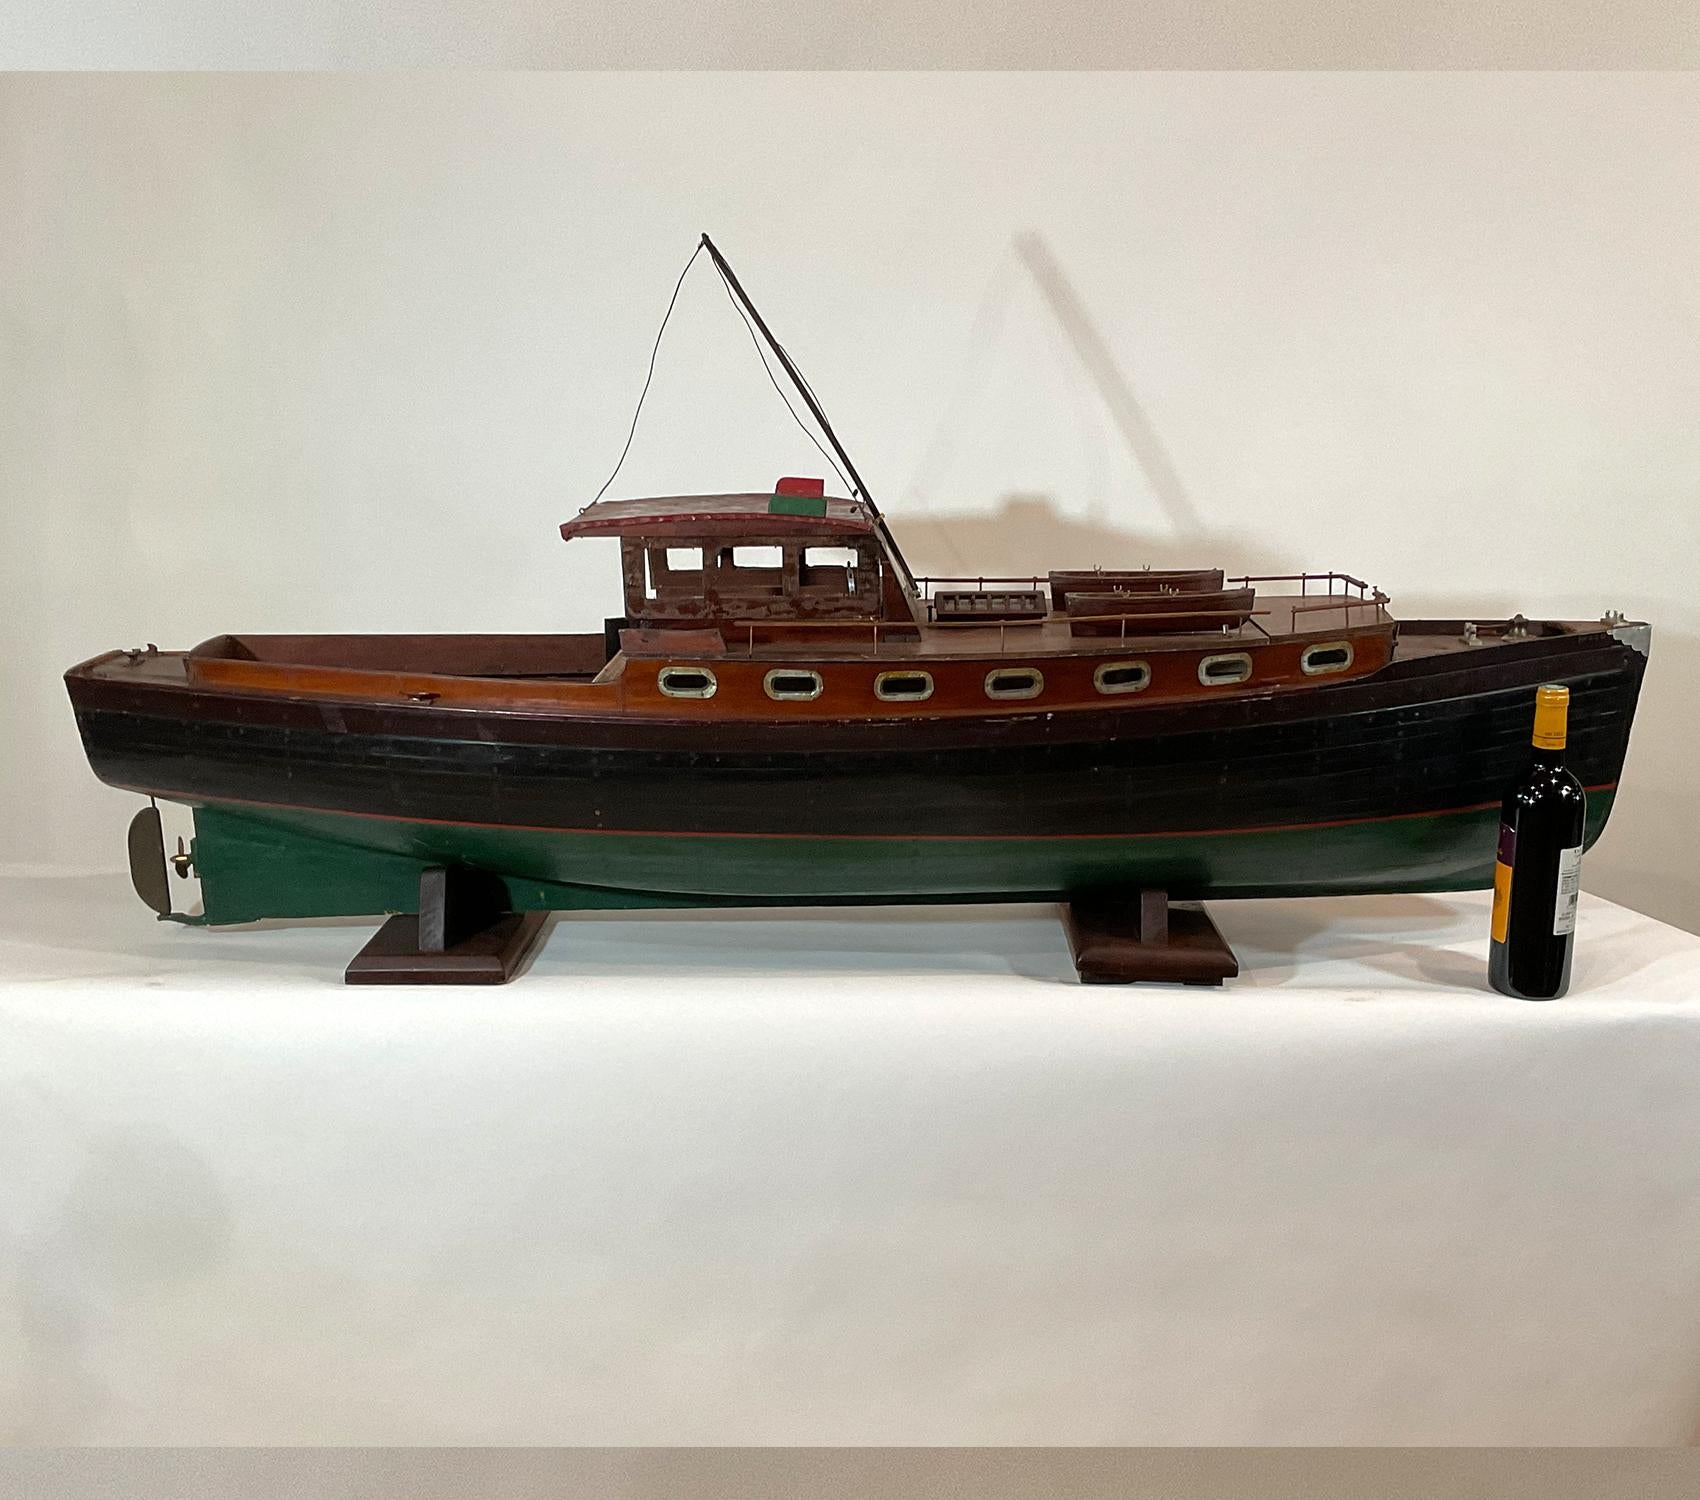 North American Classic Antique Yacht Model For Sale